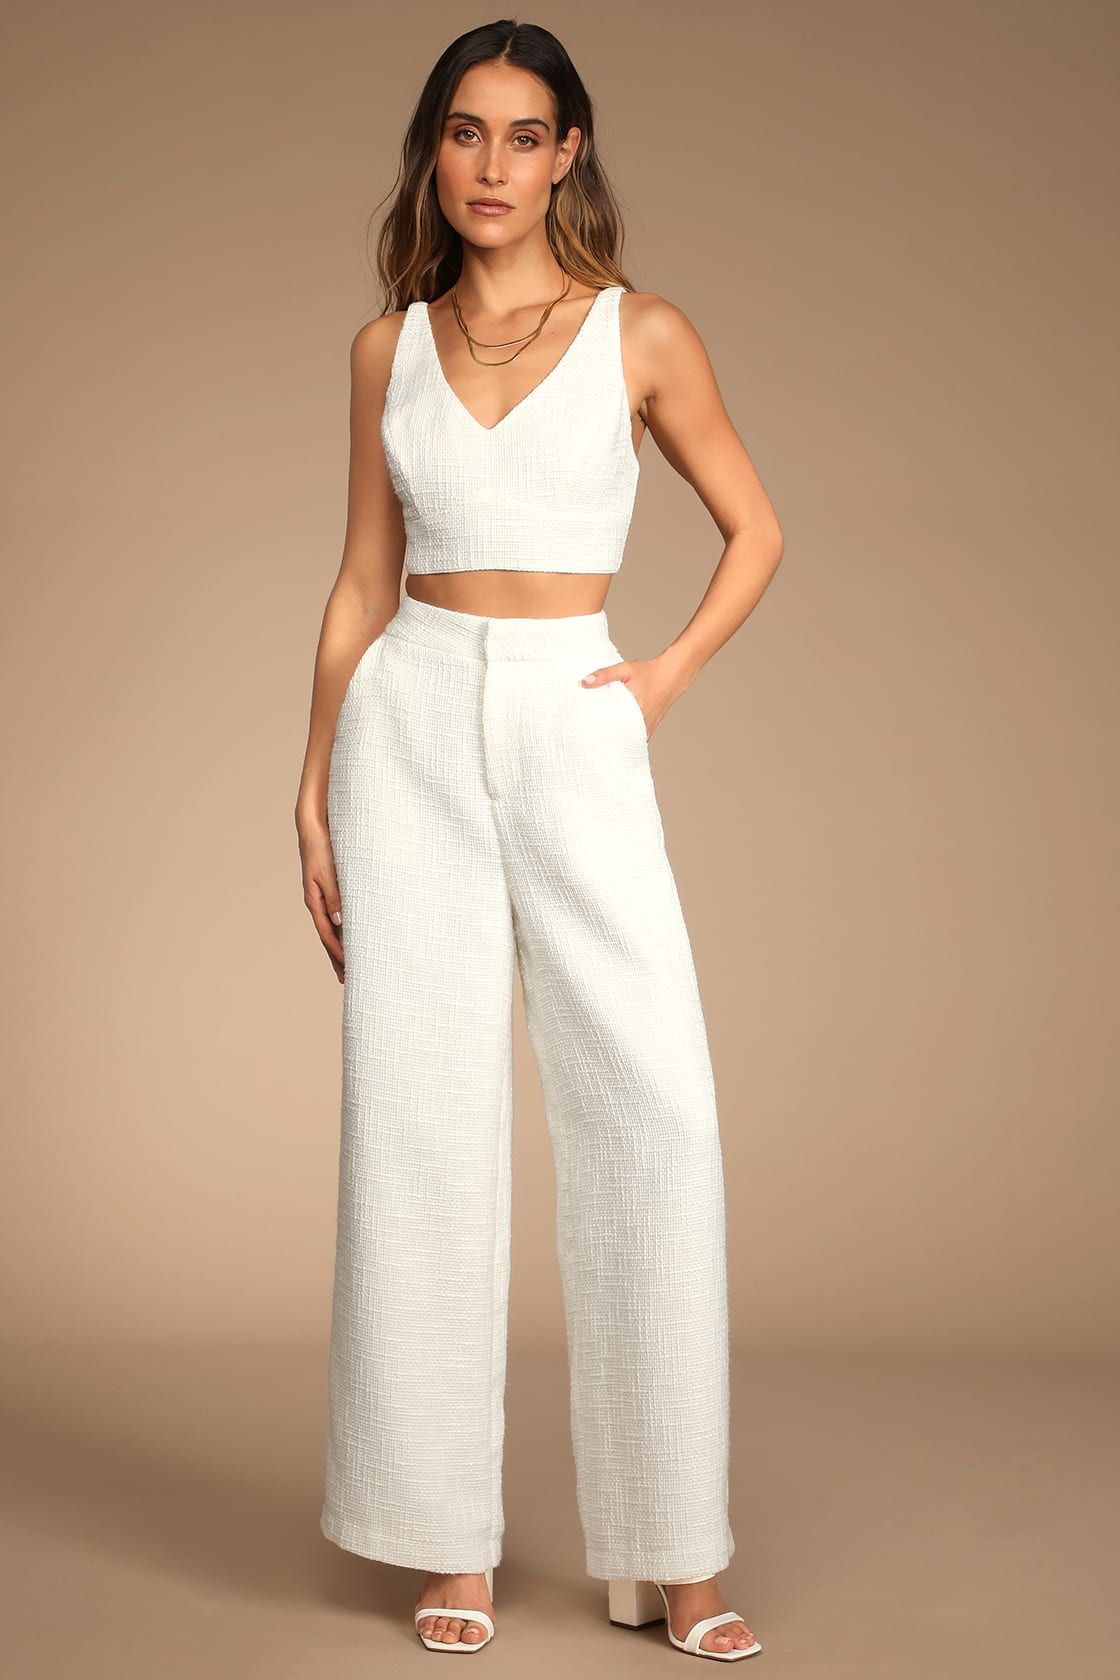 Chic and Sophisticated Ivory Tweed Wide-Leg Pants | Lulus (US)